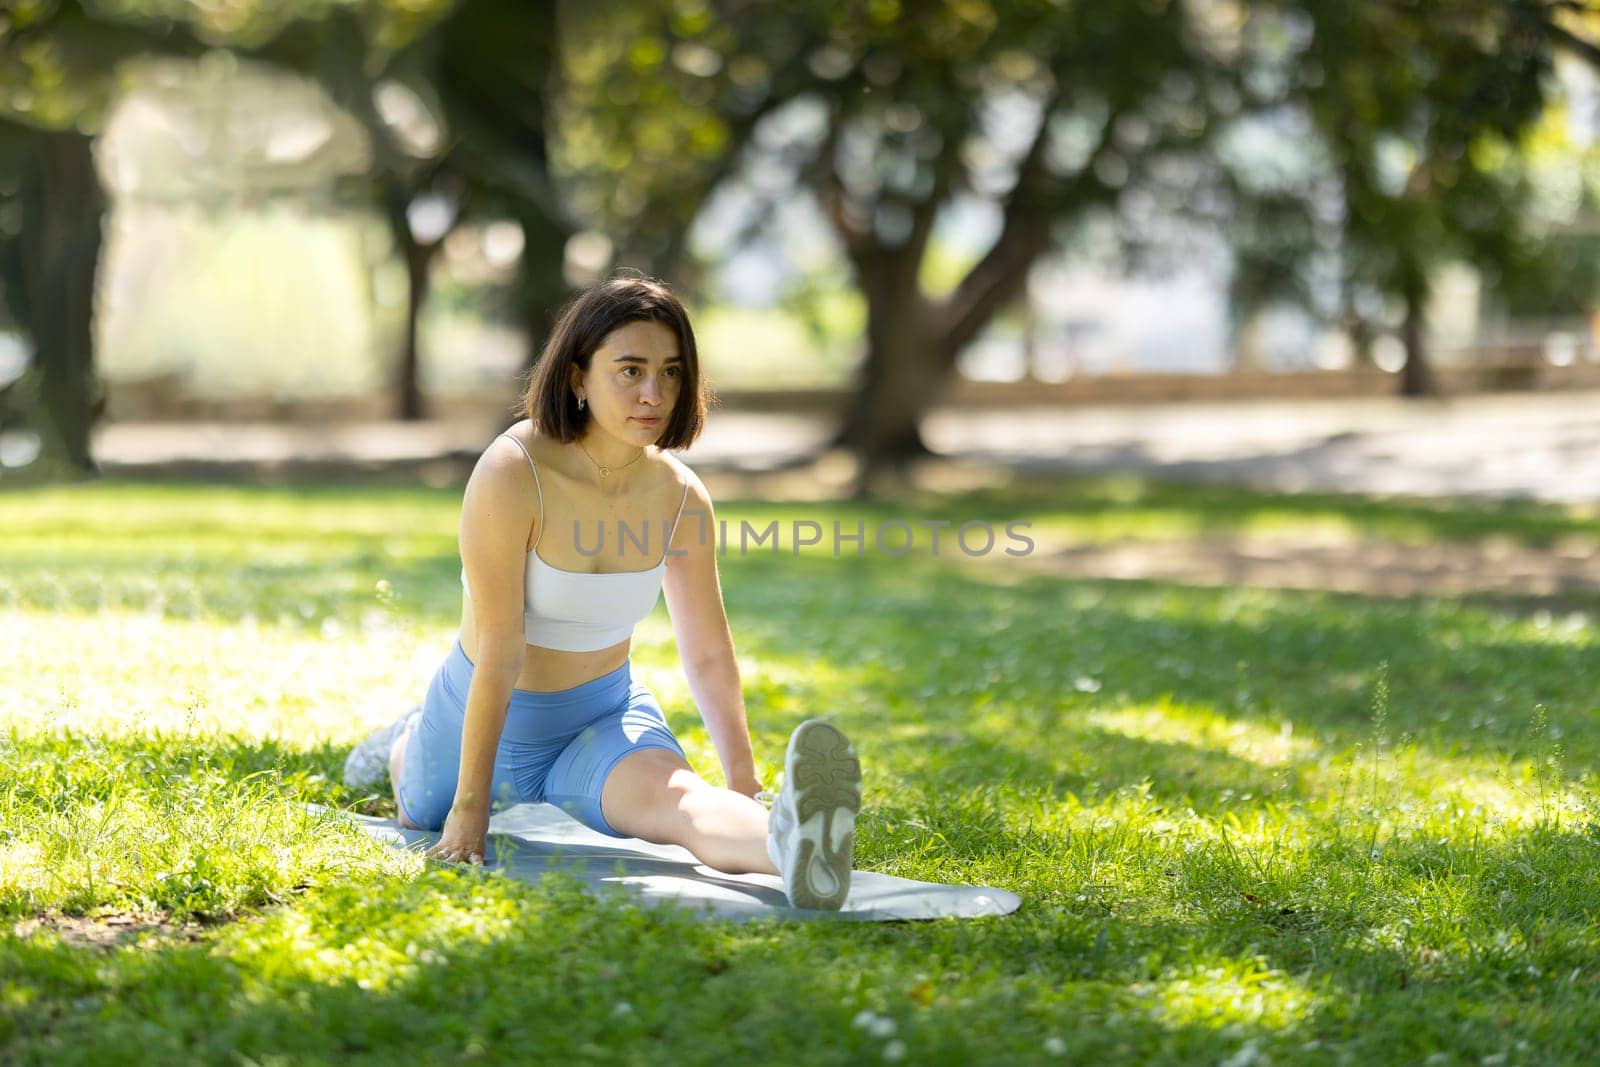 A woman is stretching in a park. She is wearing a white tank top and blue shorts. The grass is green and the sky is blue